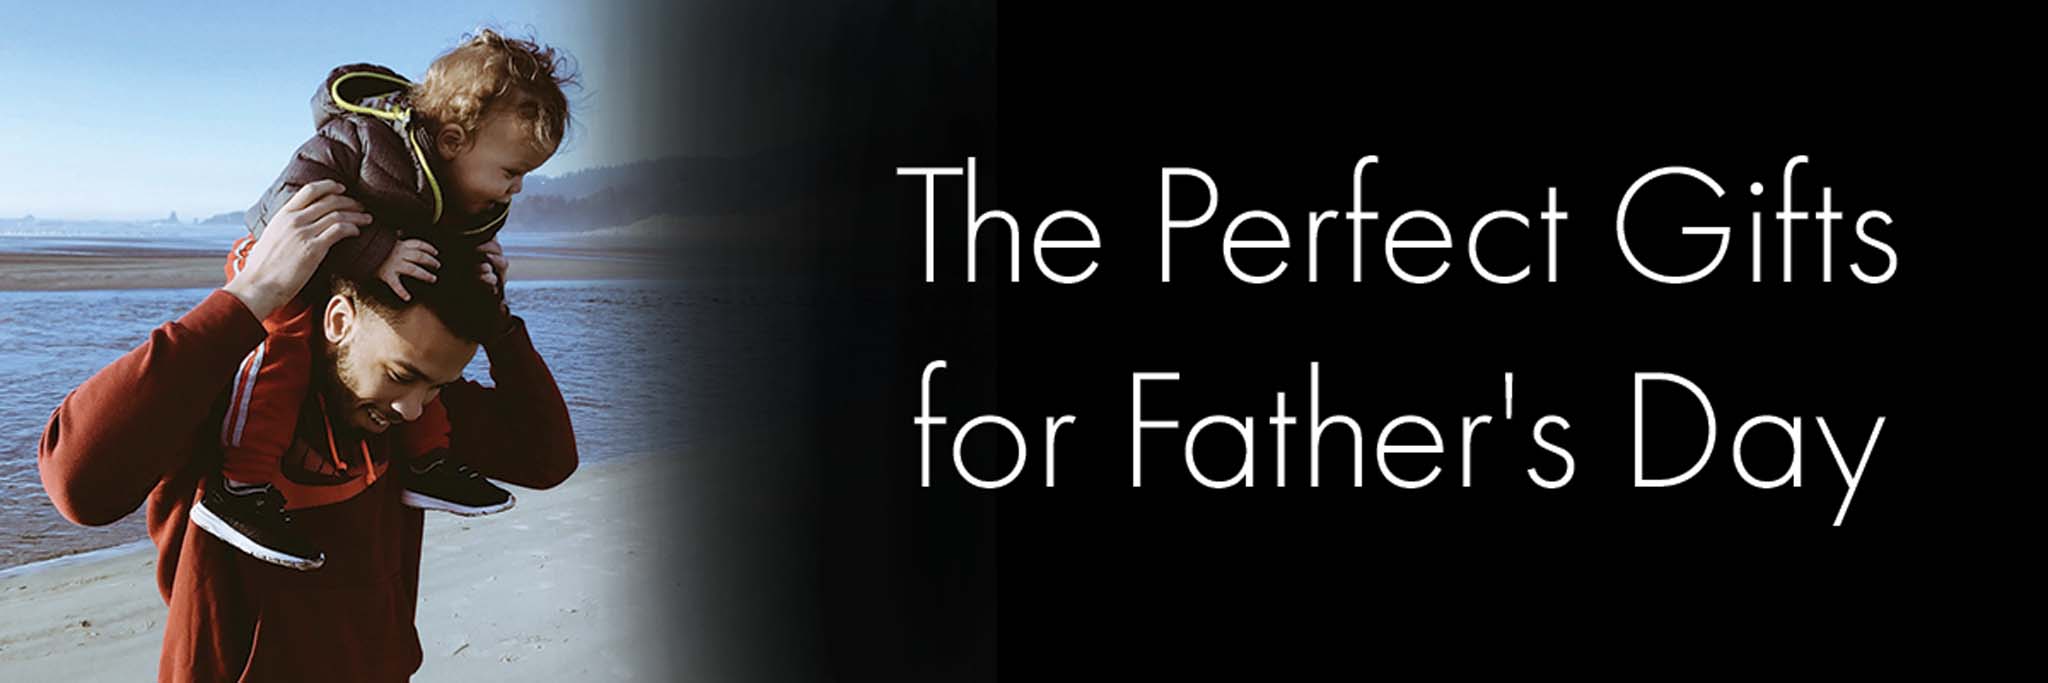 the perfect gifts for fathers day